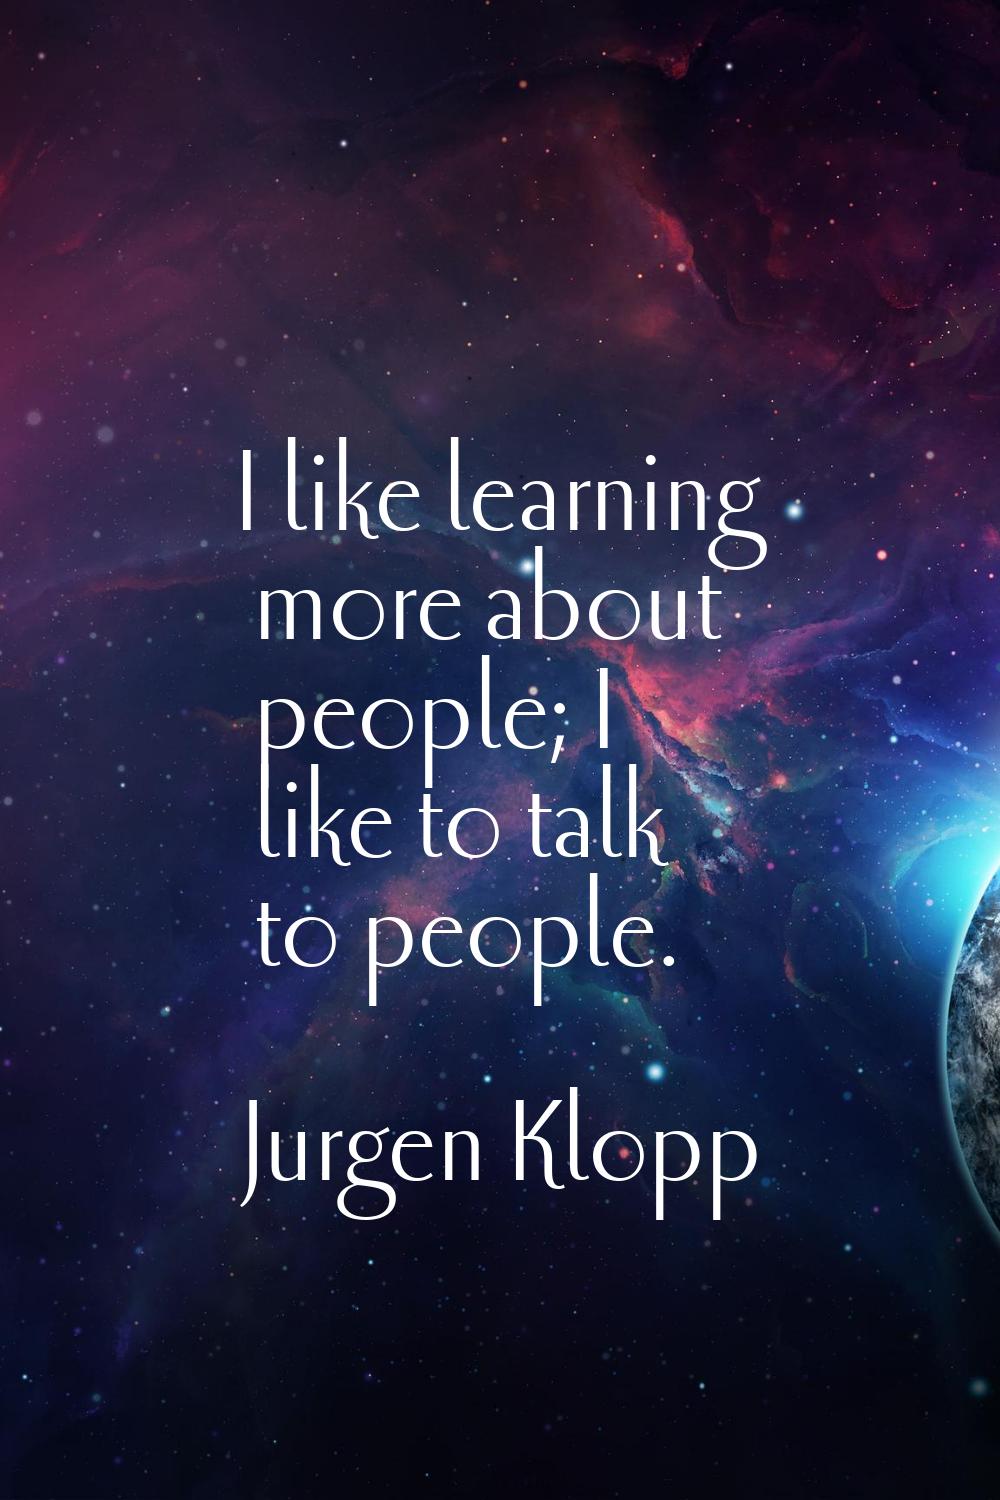 I like learning more about people; I like to talk to people.